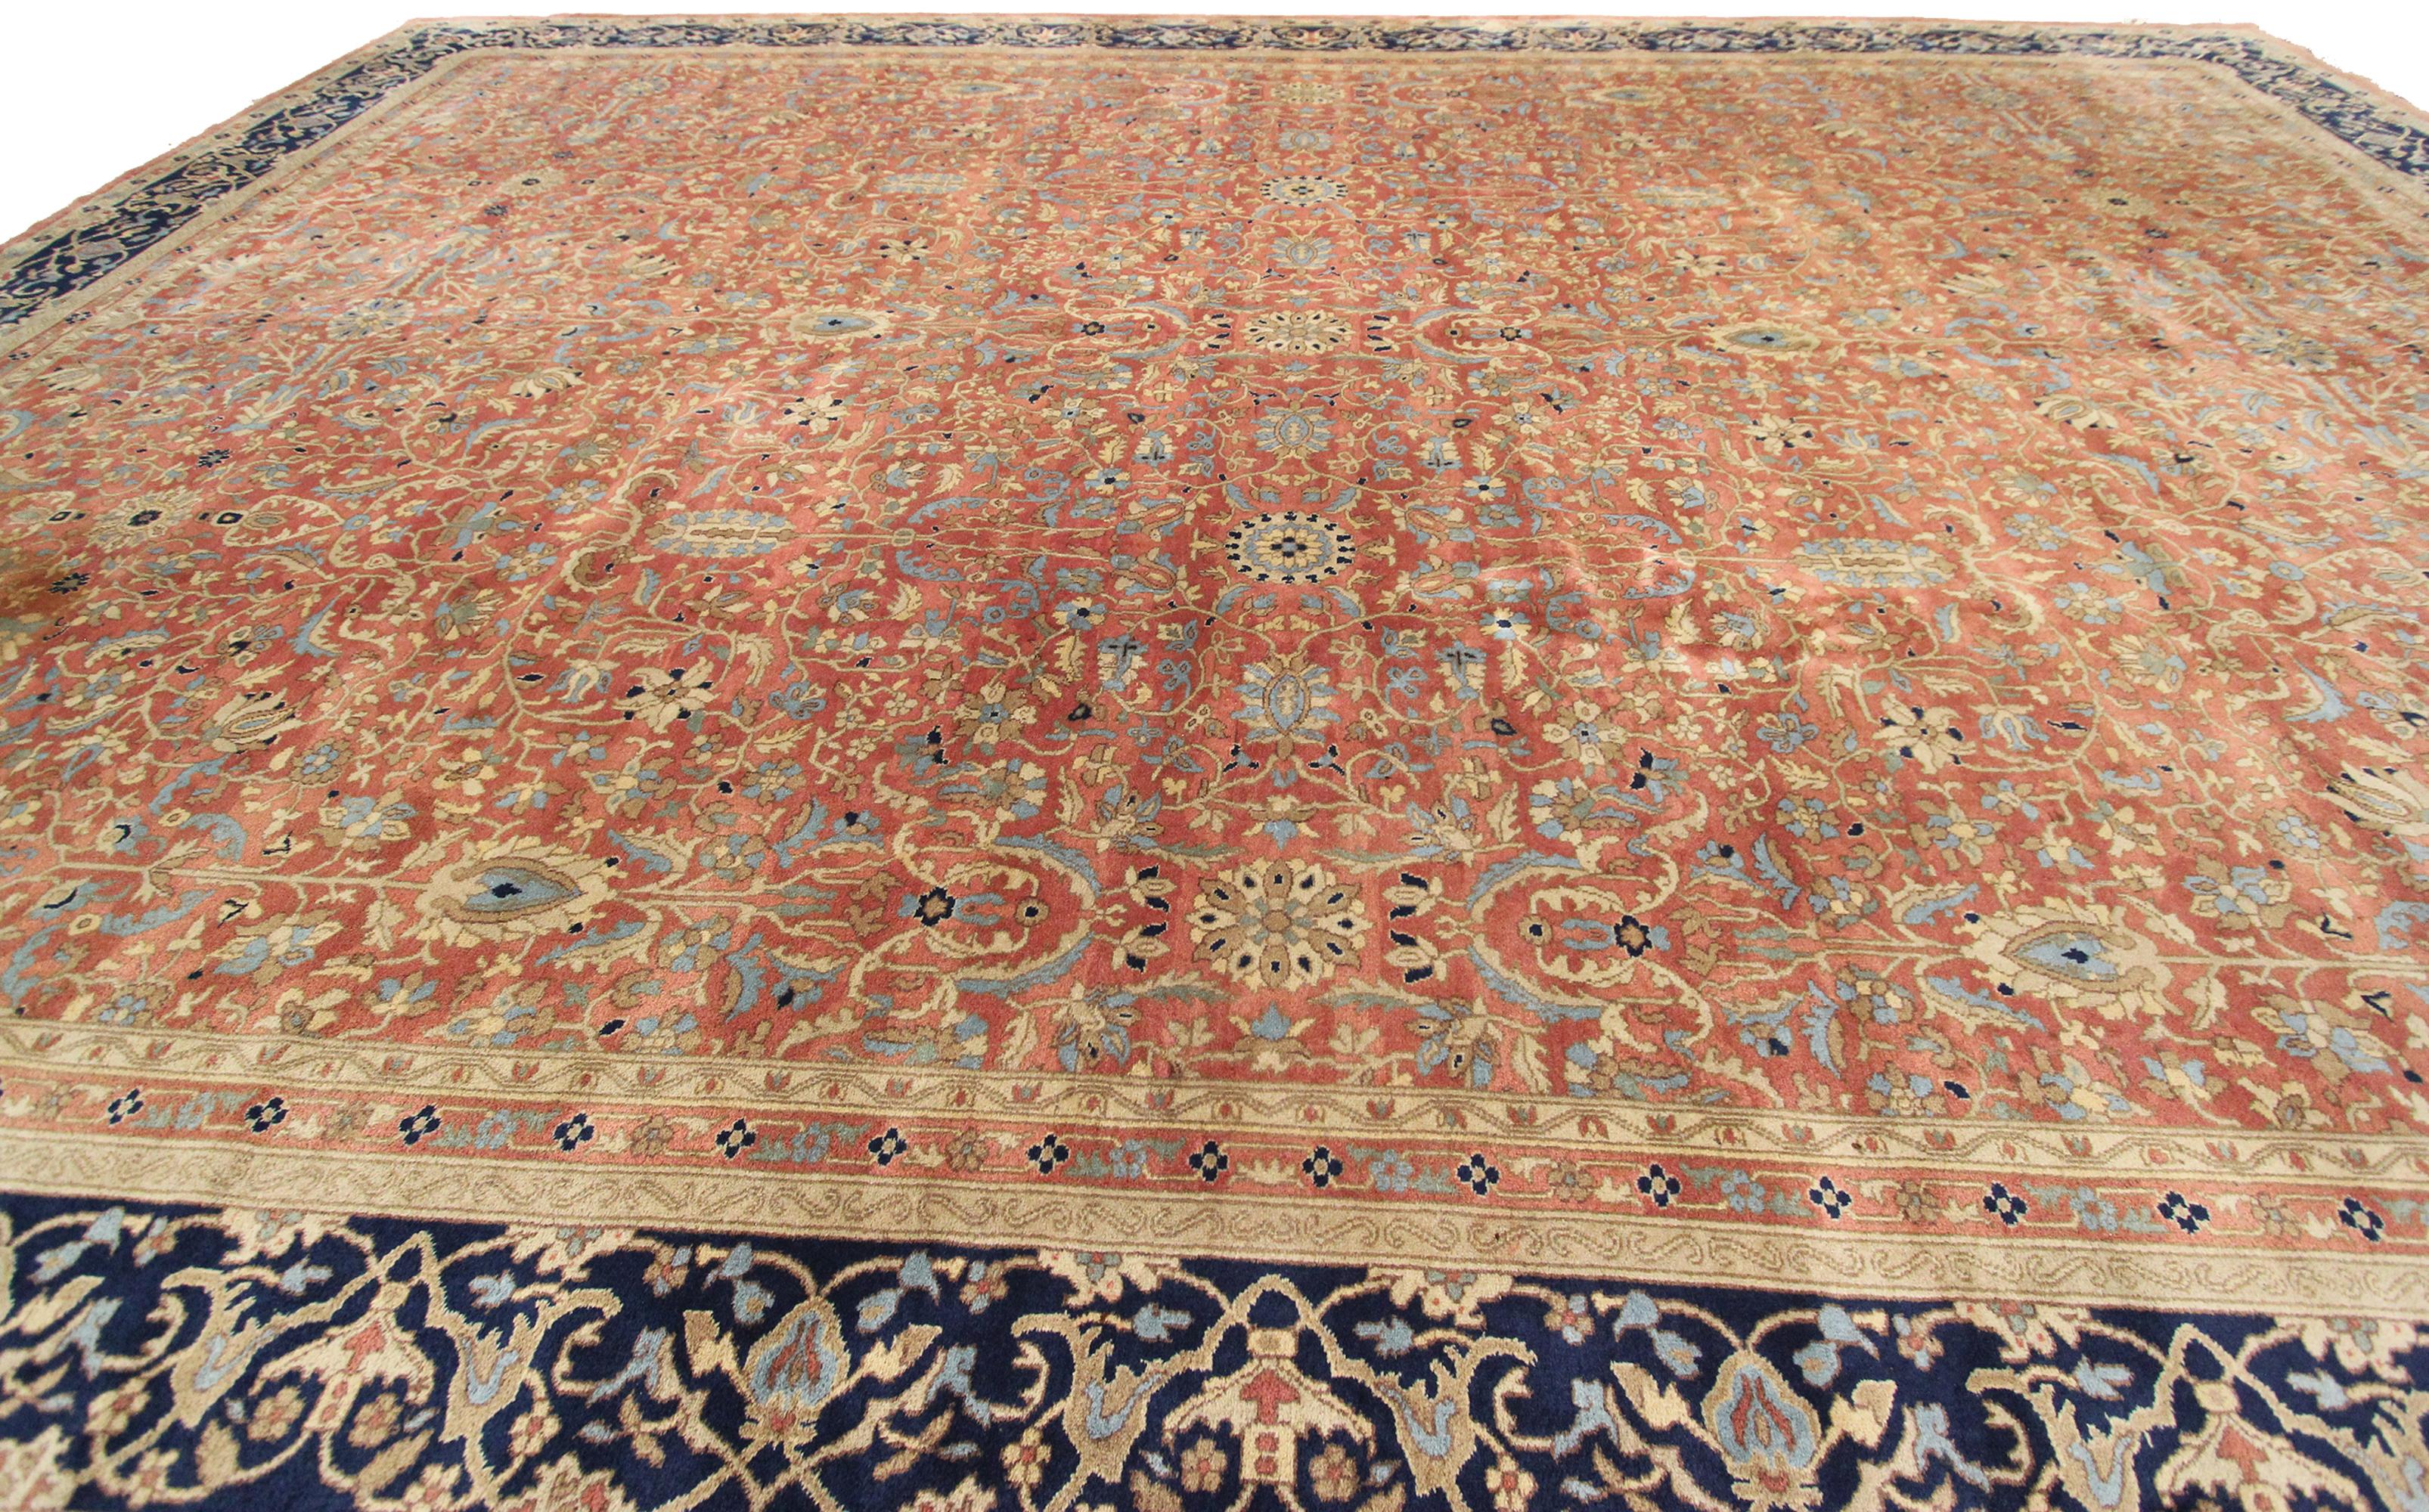 Hand-Knotted Antique Turkish Oushak Sivas Fine Geometric Overall Rug 11x16 1900 328cm x 457cm For Sale